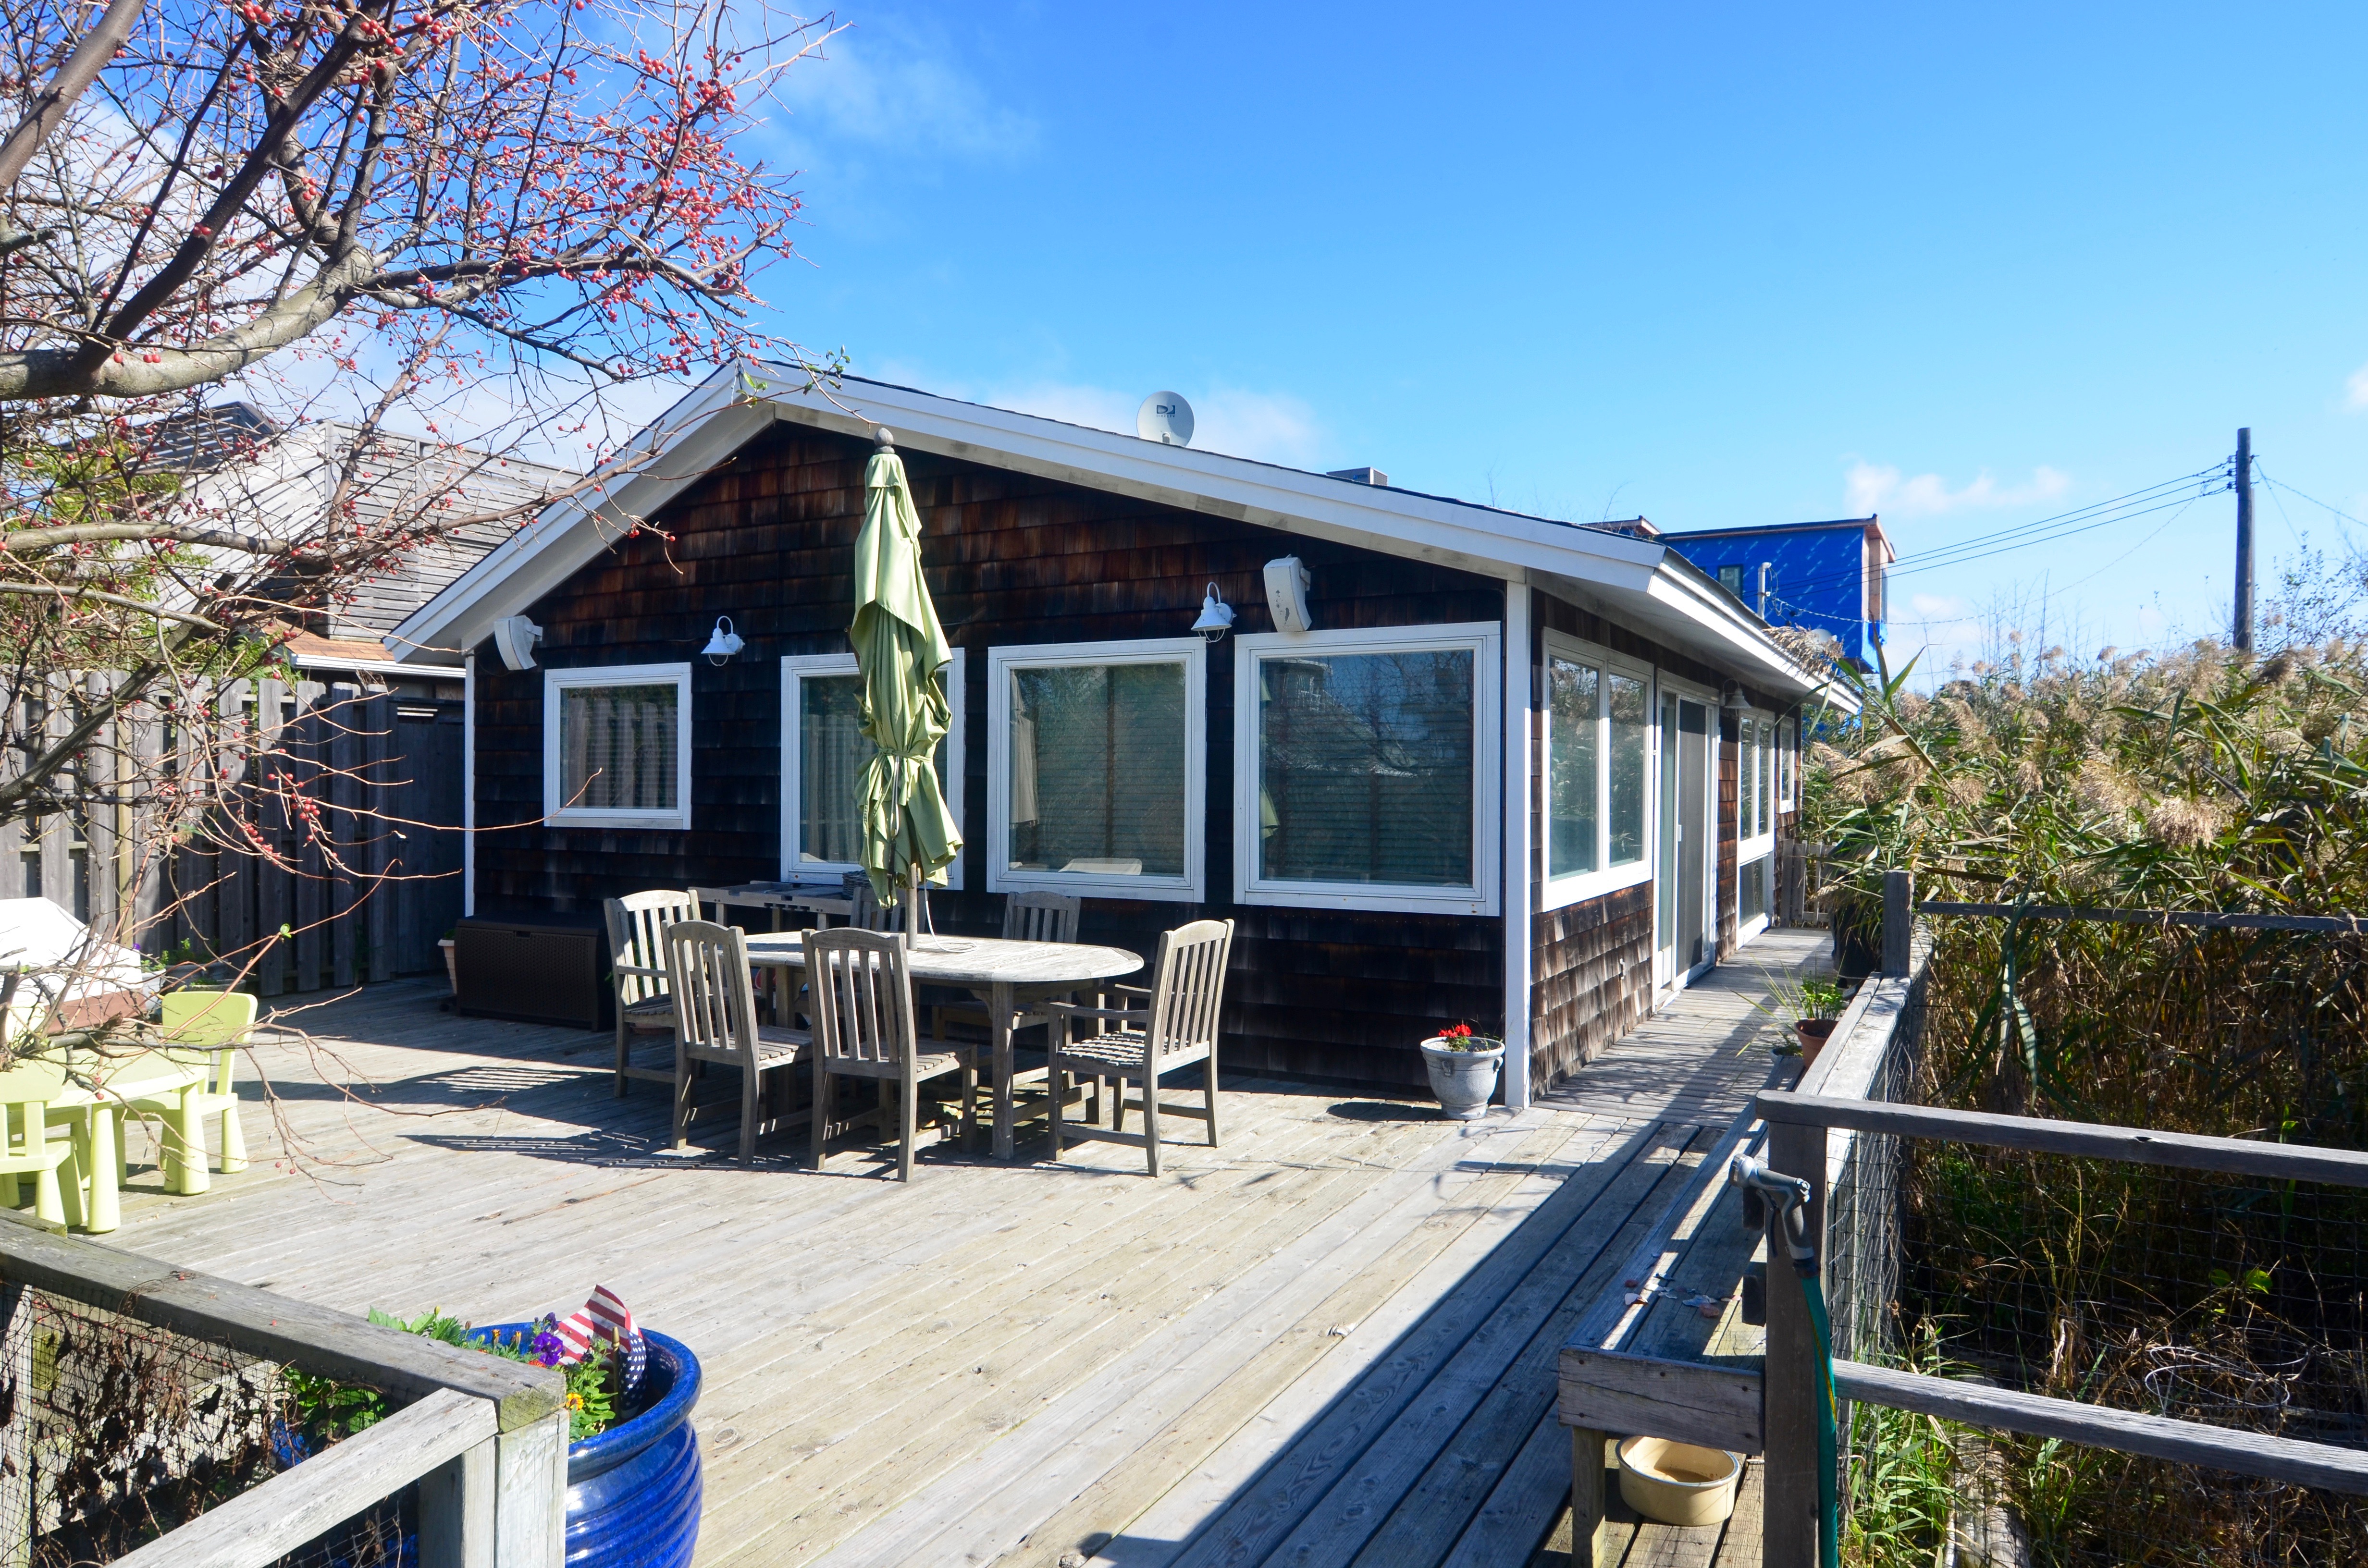 This 3 bedroom, 1.5 bathroom home has it all! Great location near the Seaview border. Sunny west facing deck. Designer kitchen with Miele and Subzero appliances. Open layout great for family gatherings. Both bathrooms nicely renovated.  Available for weekly rent Monday-Sunday.  Small pets considered. 